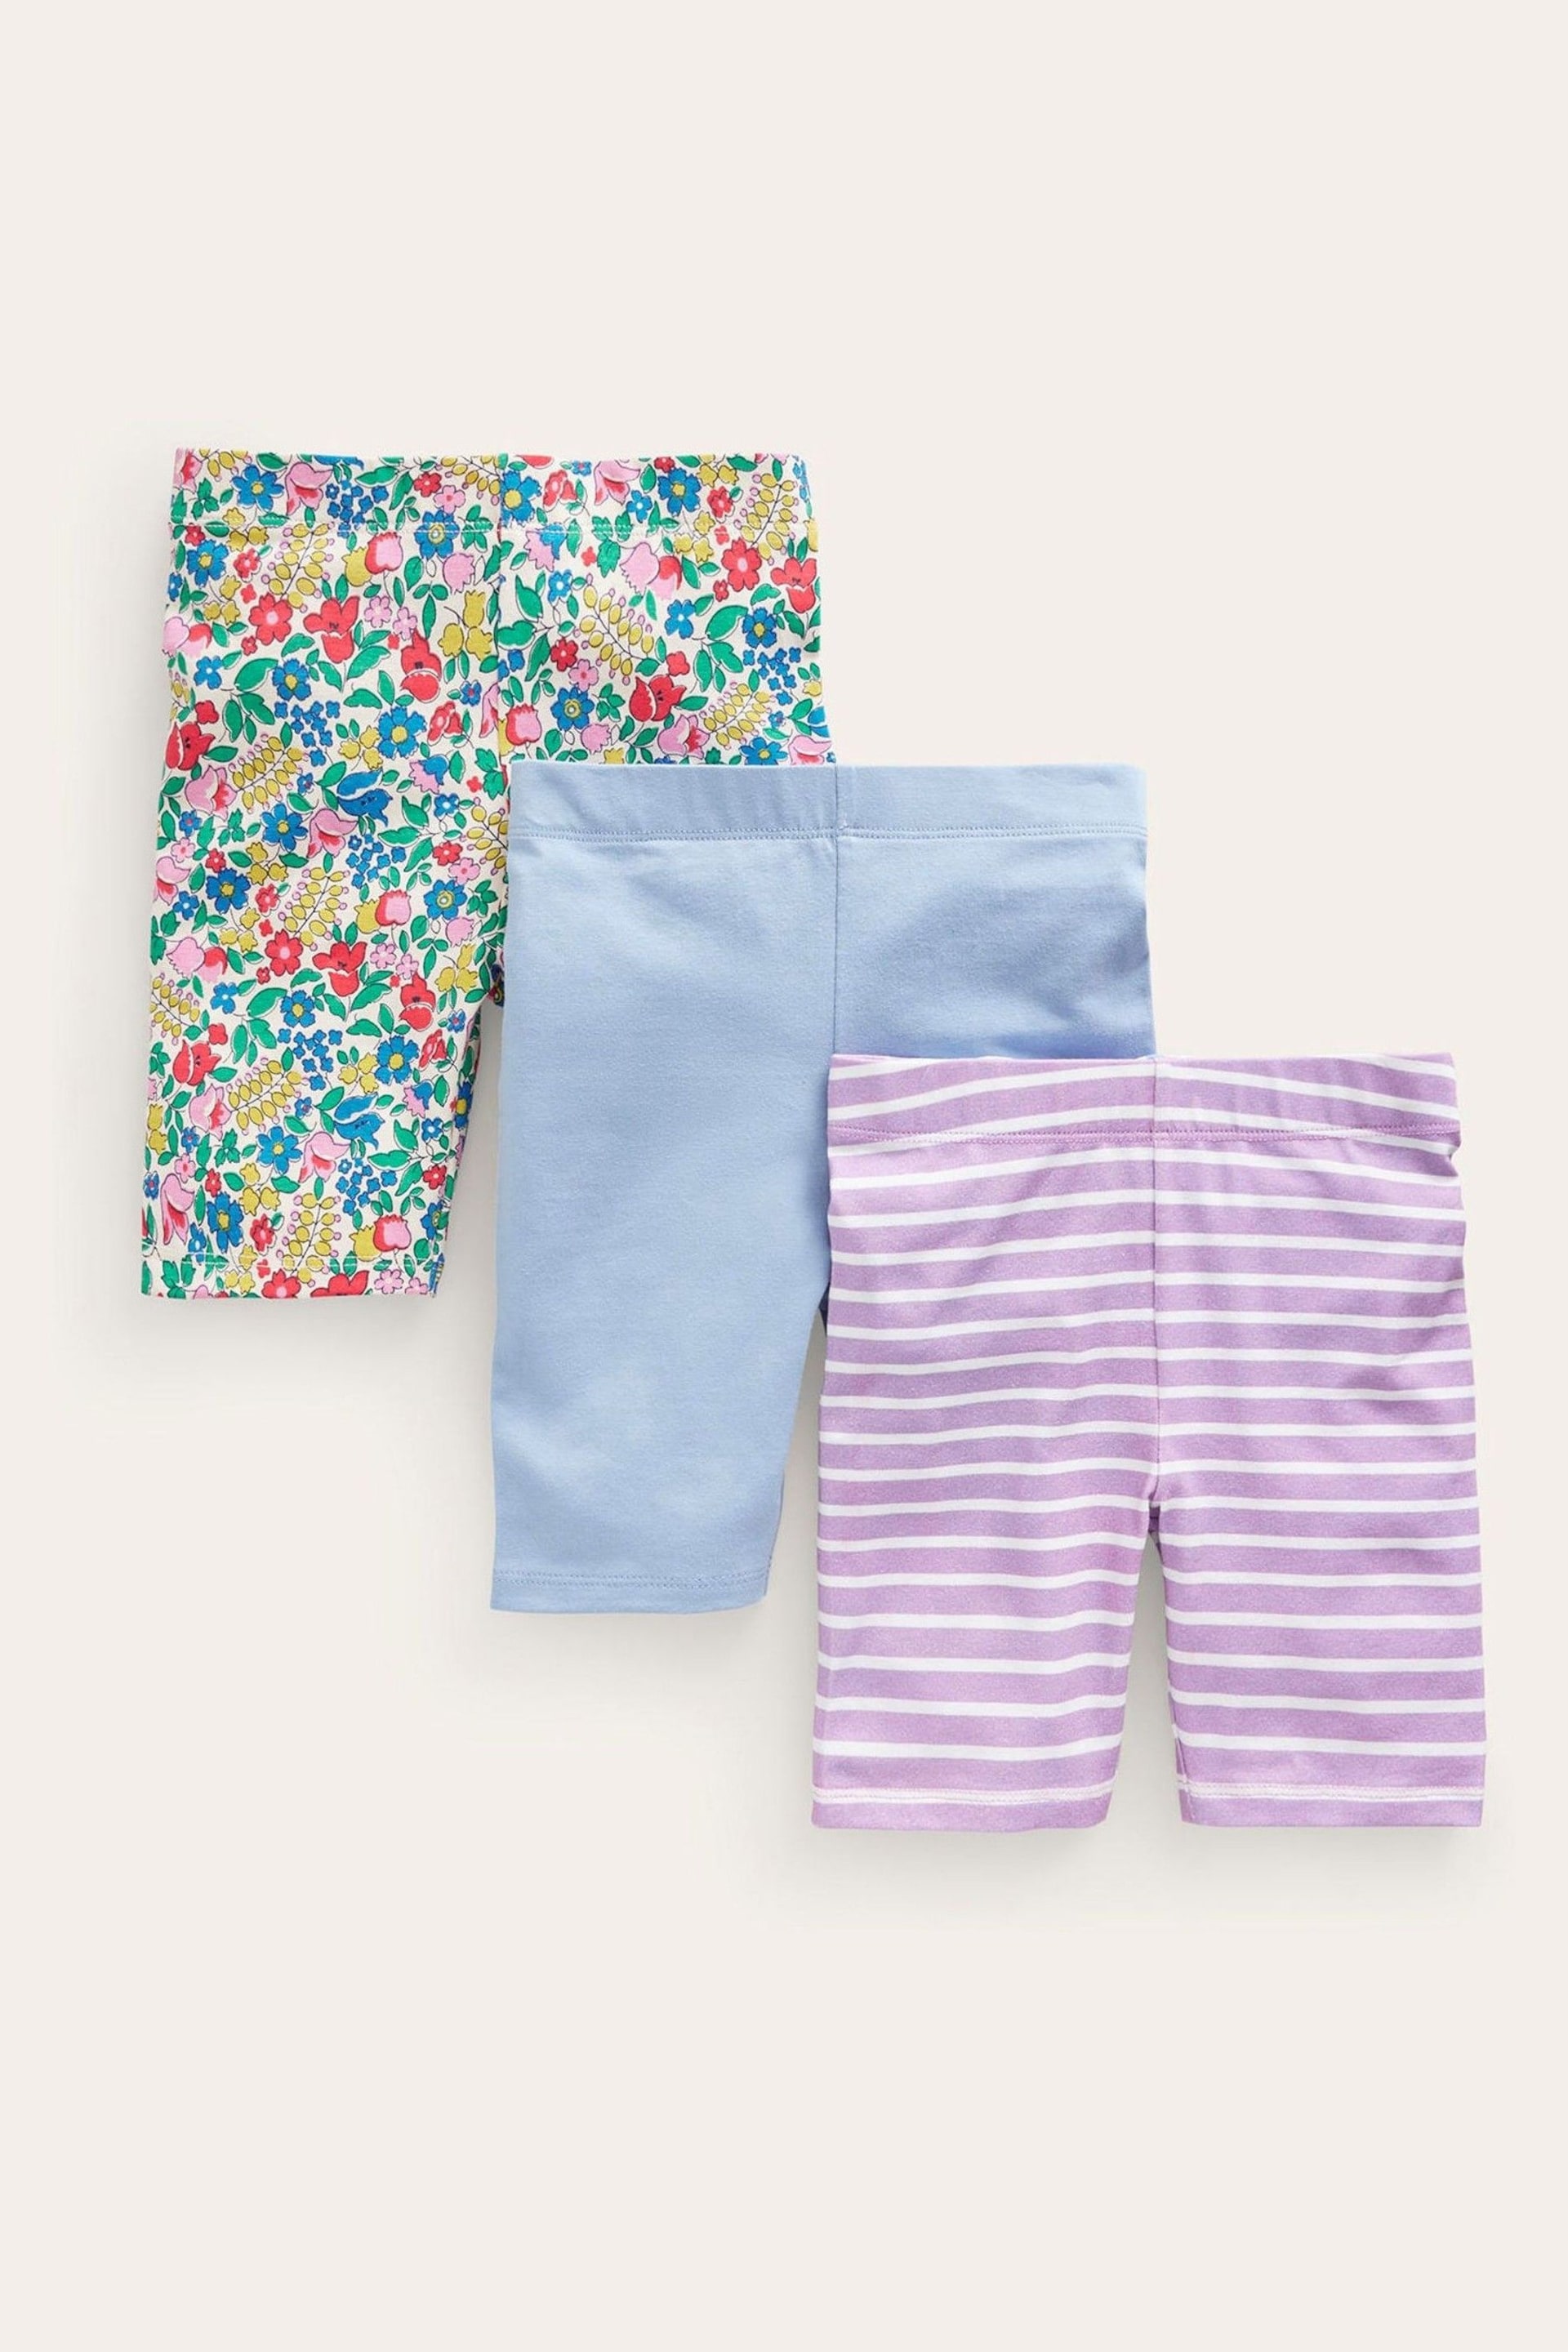 Boden Pink Cycling Shorts 3 Pack - Image 1 of 2